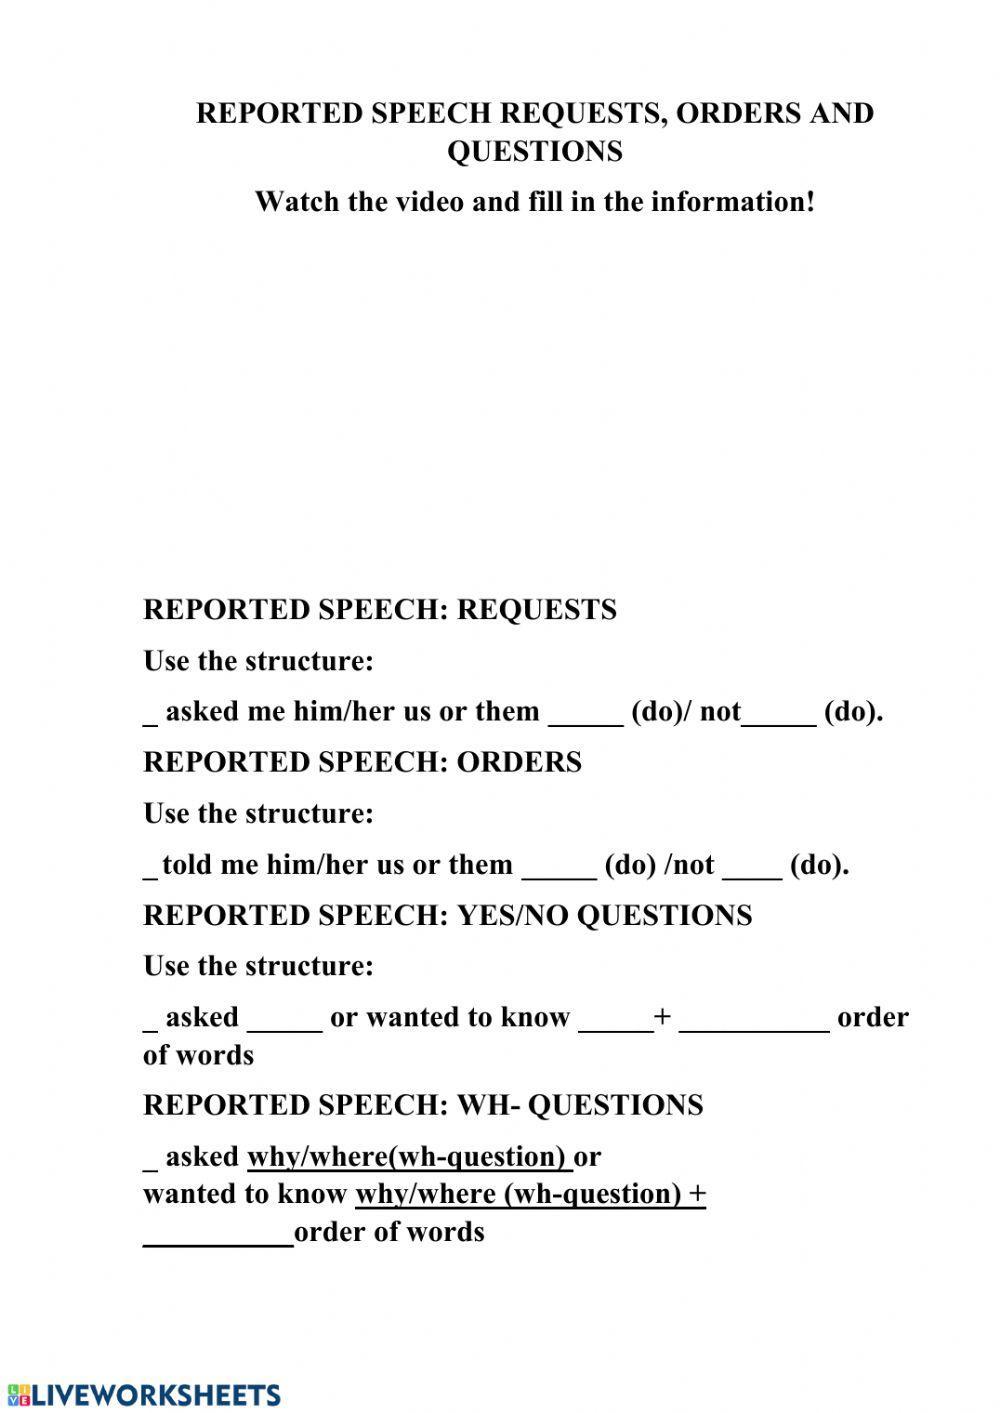 Reported Speech (orders,requests,questions)